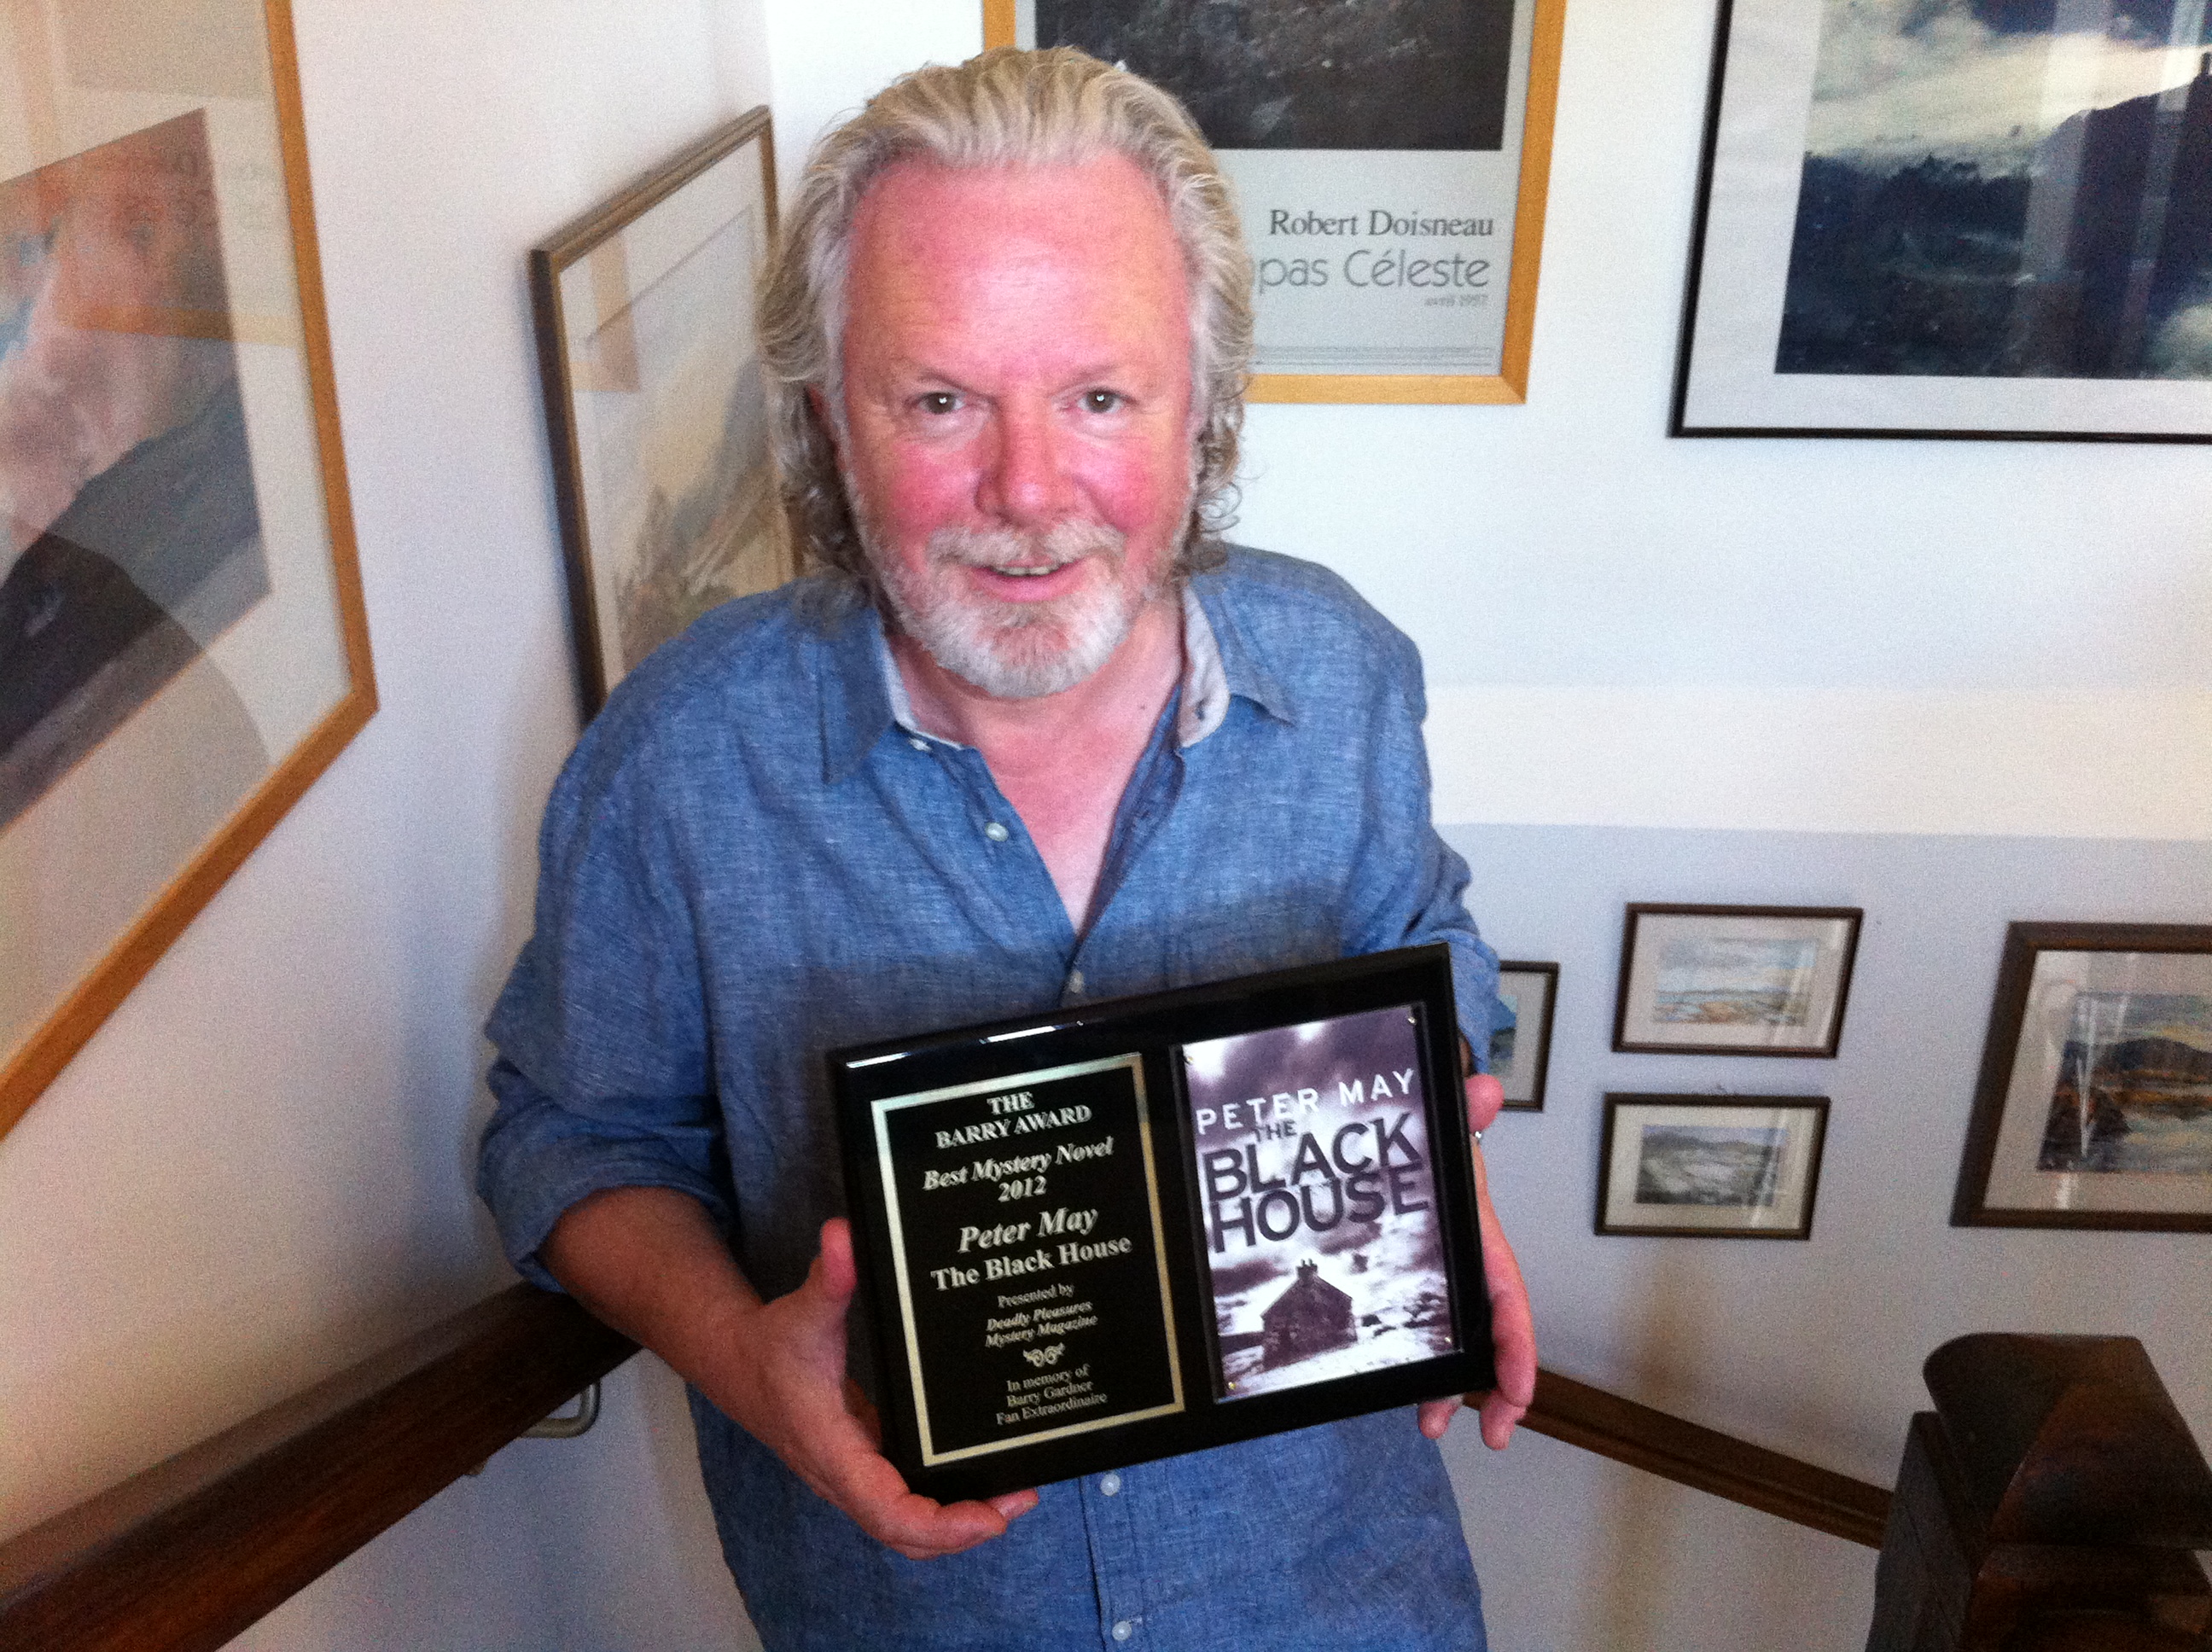 Peter May with the Barry Award for Best Crime
                  Novel in the US, 2013